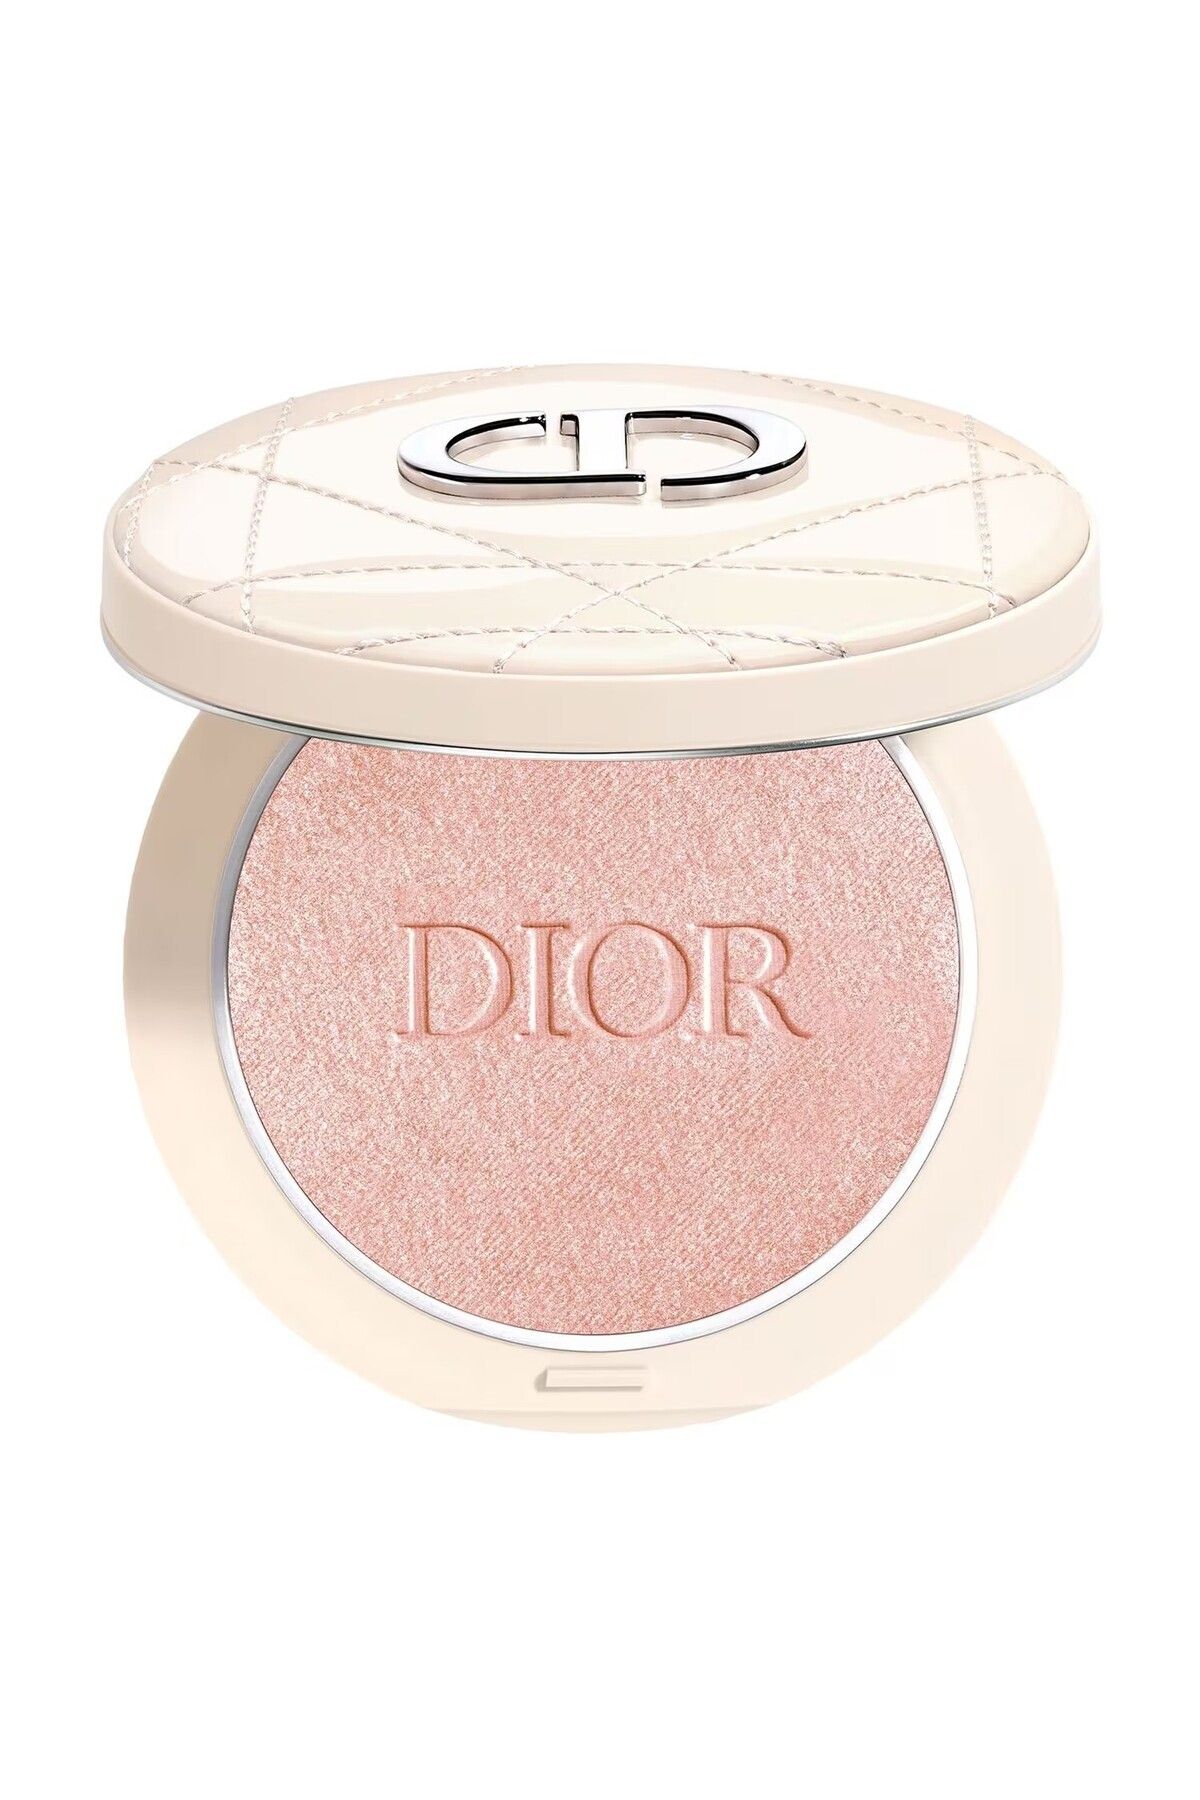 Dior FOREVER COUTURE - 95% NATURAL, ILLUMİNATOR THAT STRENGTHENS SKİN RADİANCE 6 GR PSSN2043